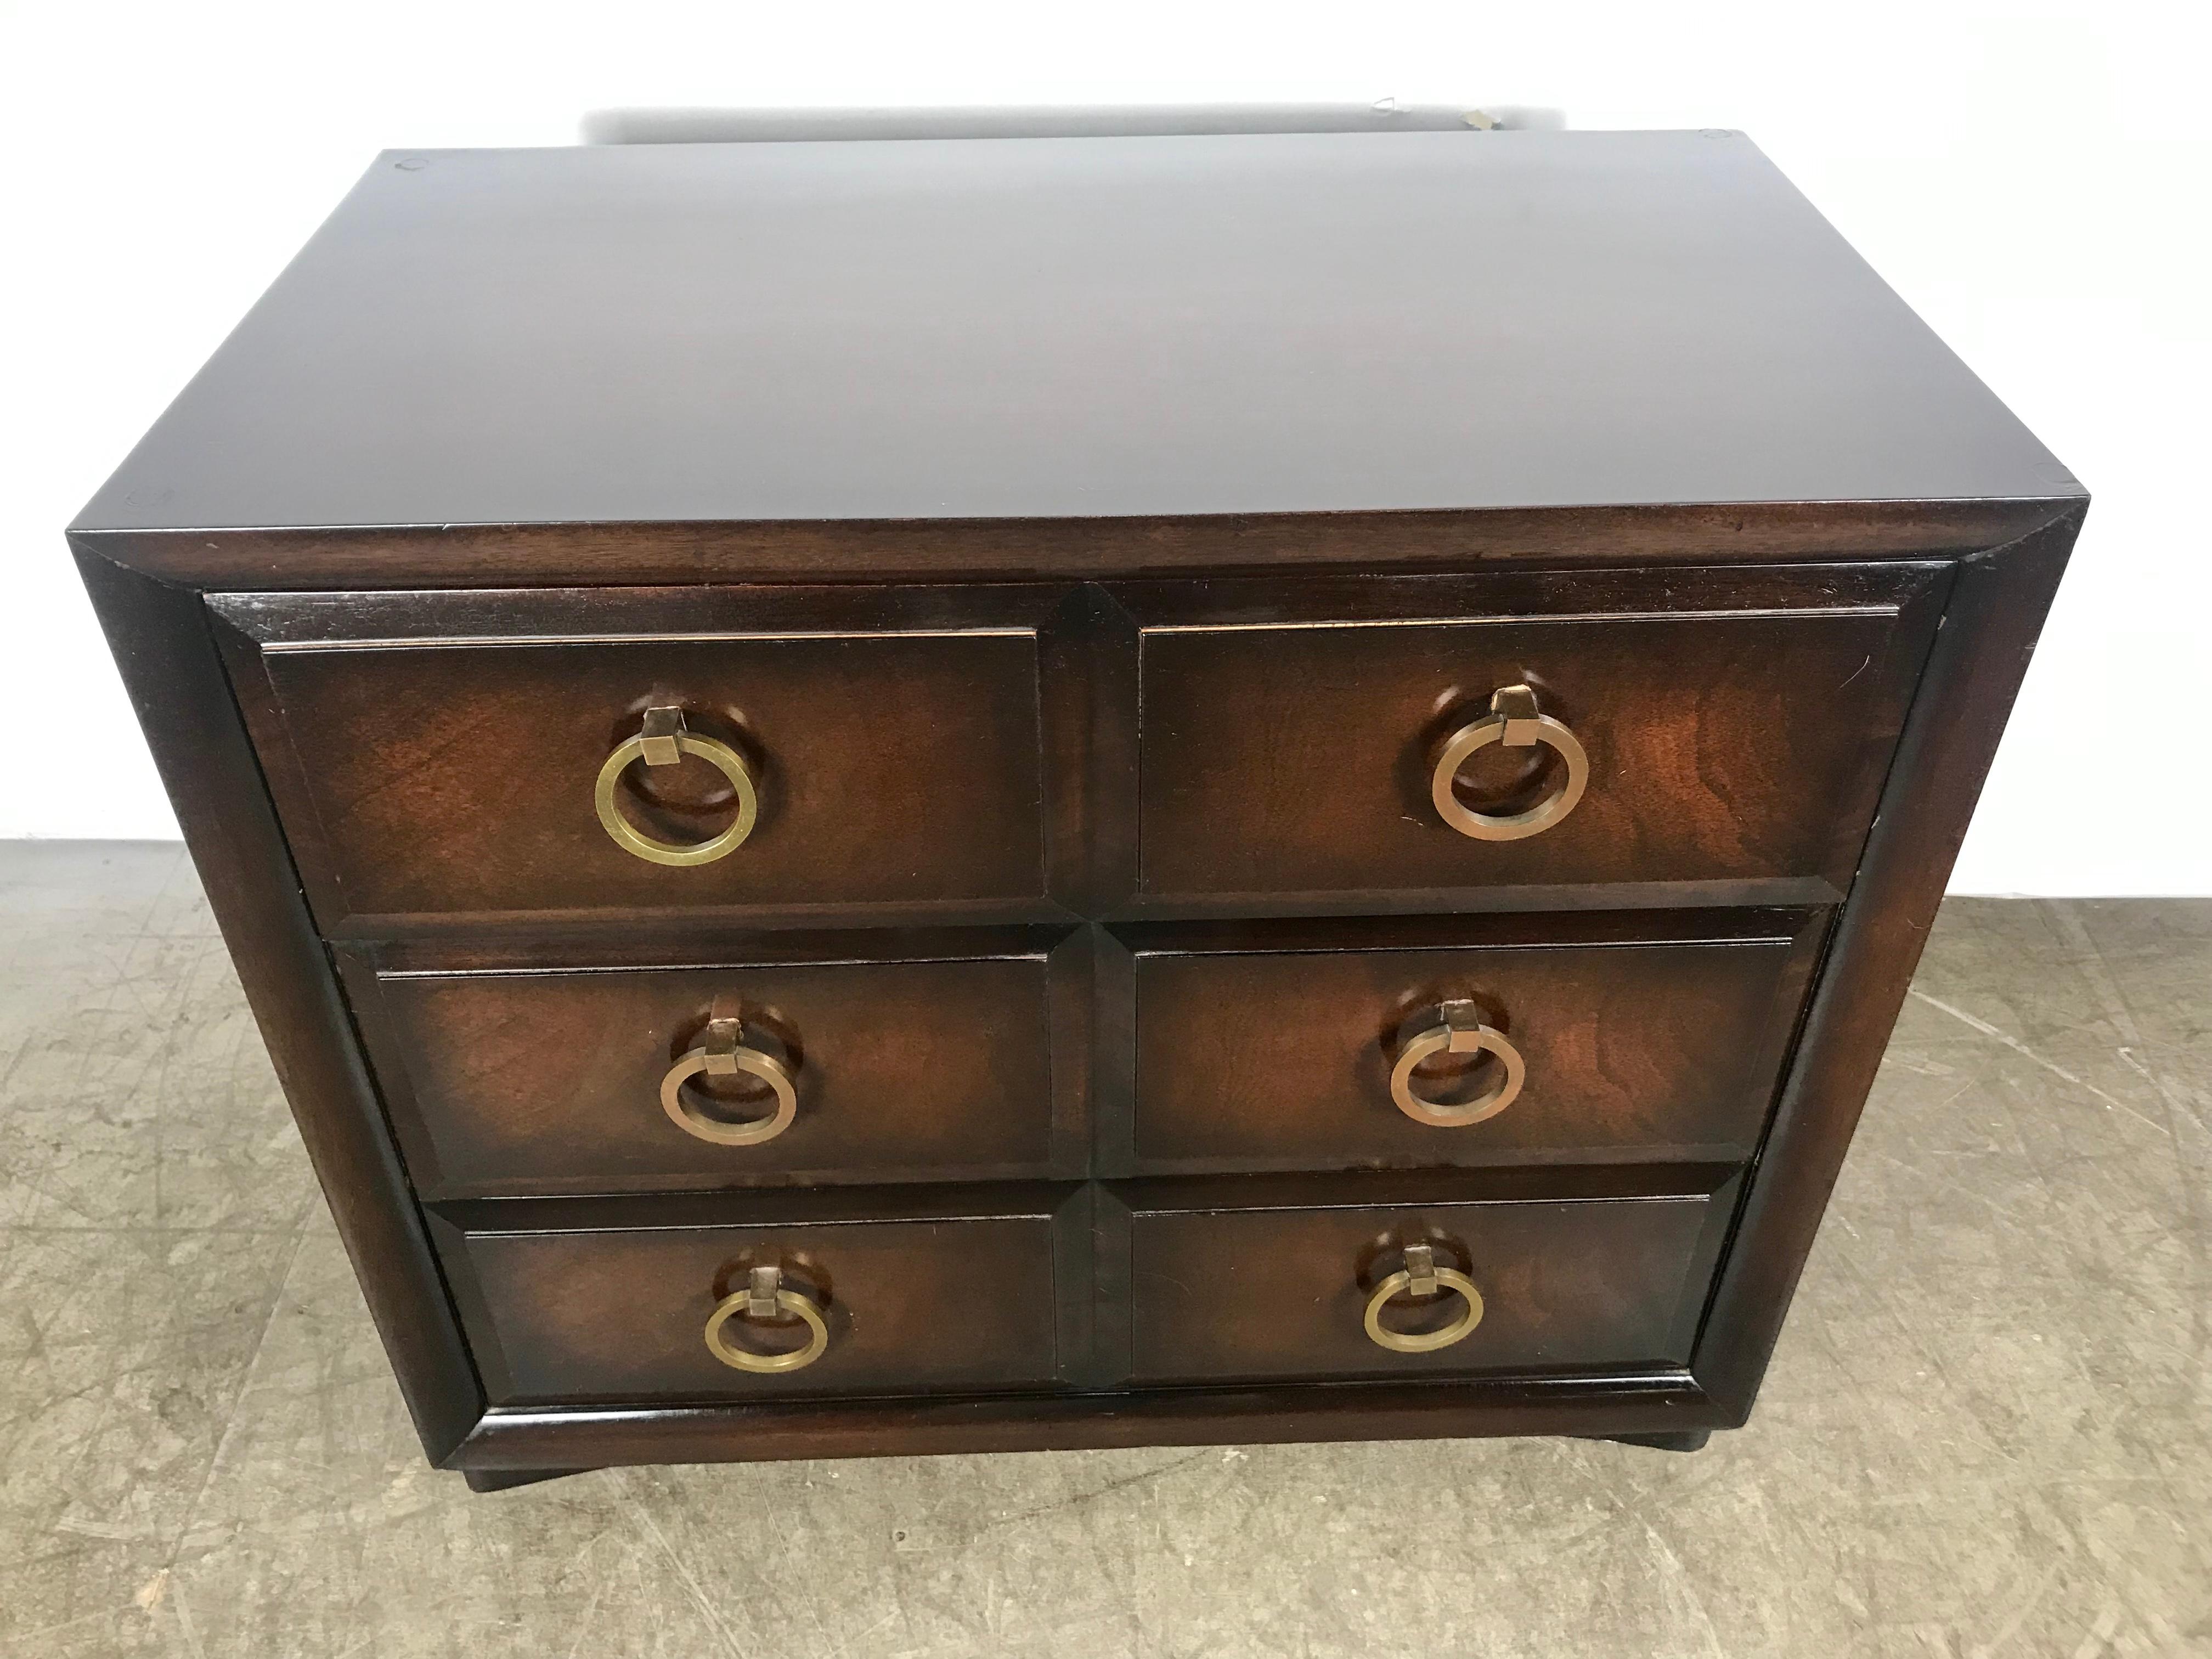 Classic modern Regency 3-drawer dresser / chest .Widdicomb,, Stunning brass ring hand pulls, superior quality and construction,, dove tail joinery ,solid mahogany .Retains Original / Modern Widdicomb label, Hand delivery avail to New York City or